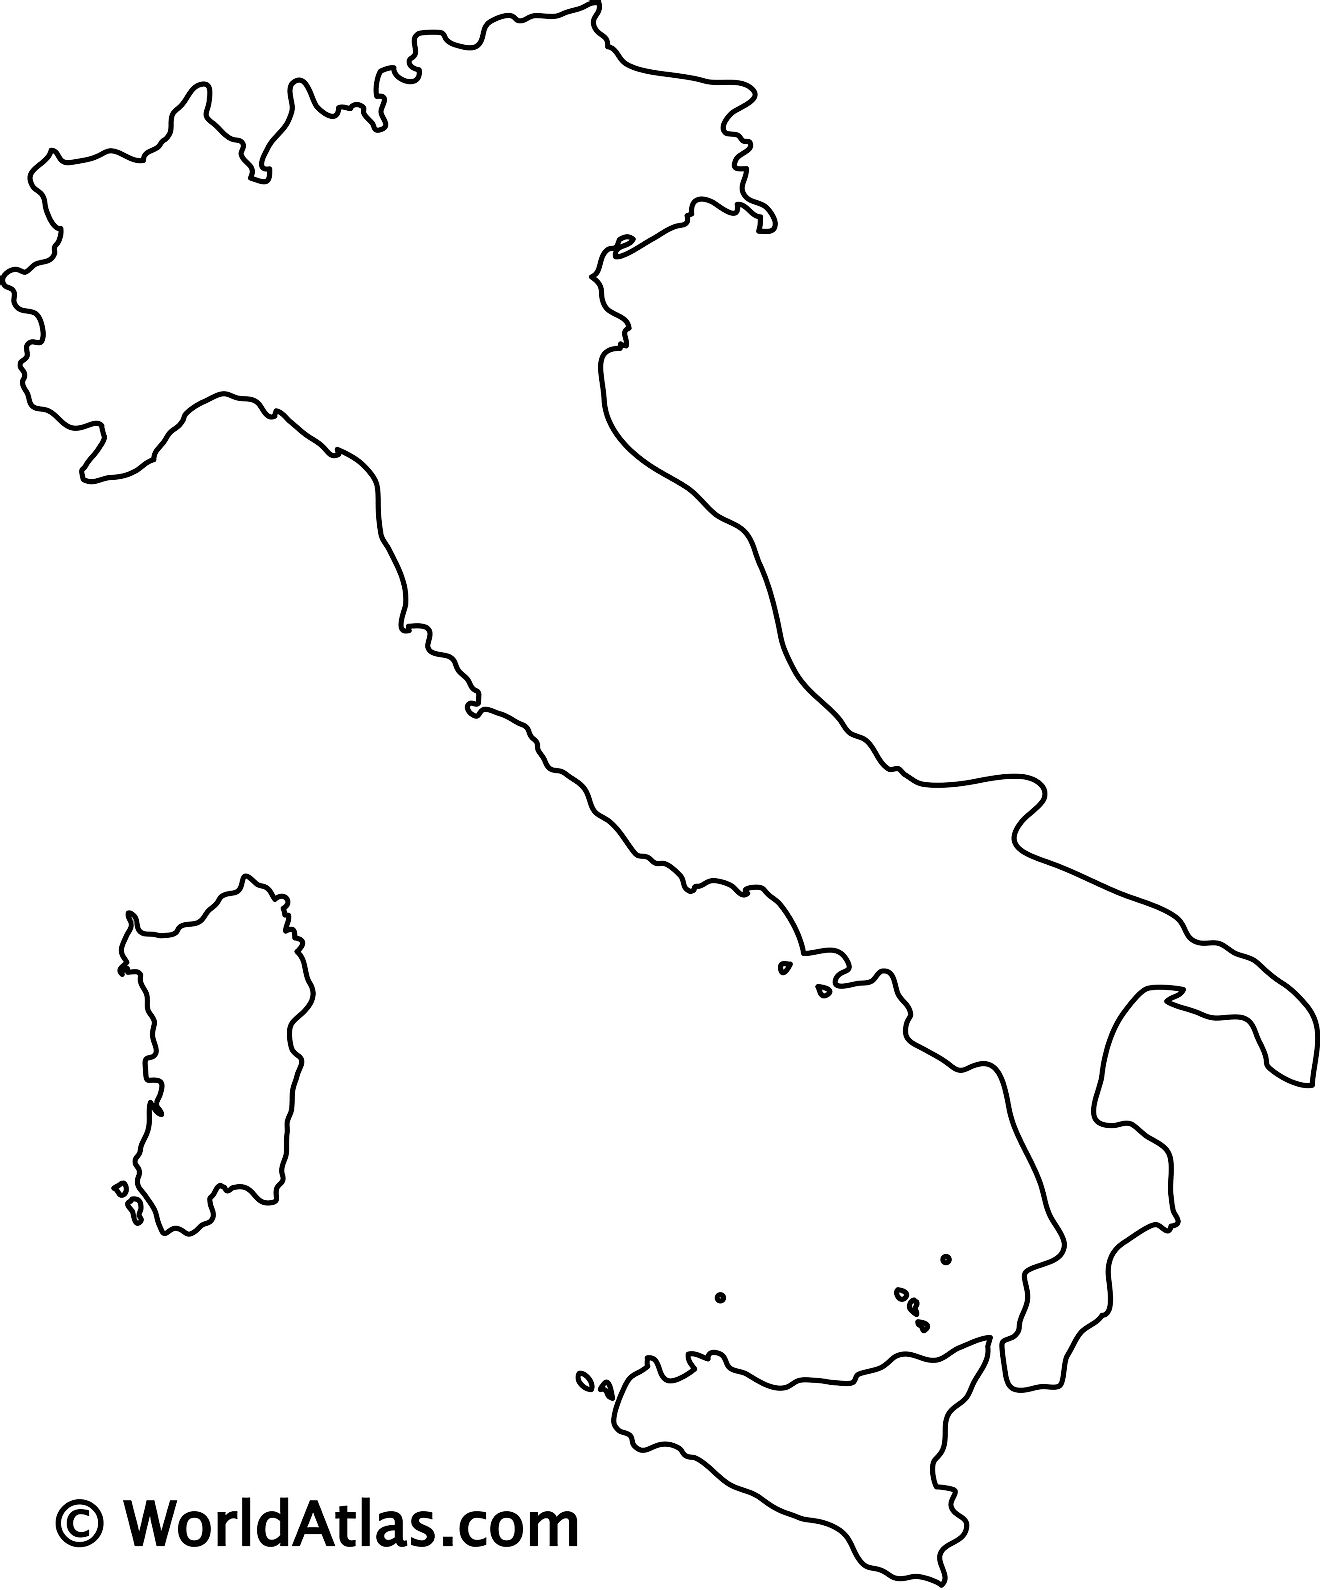 Blank outline map of Italy